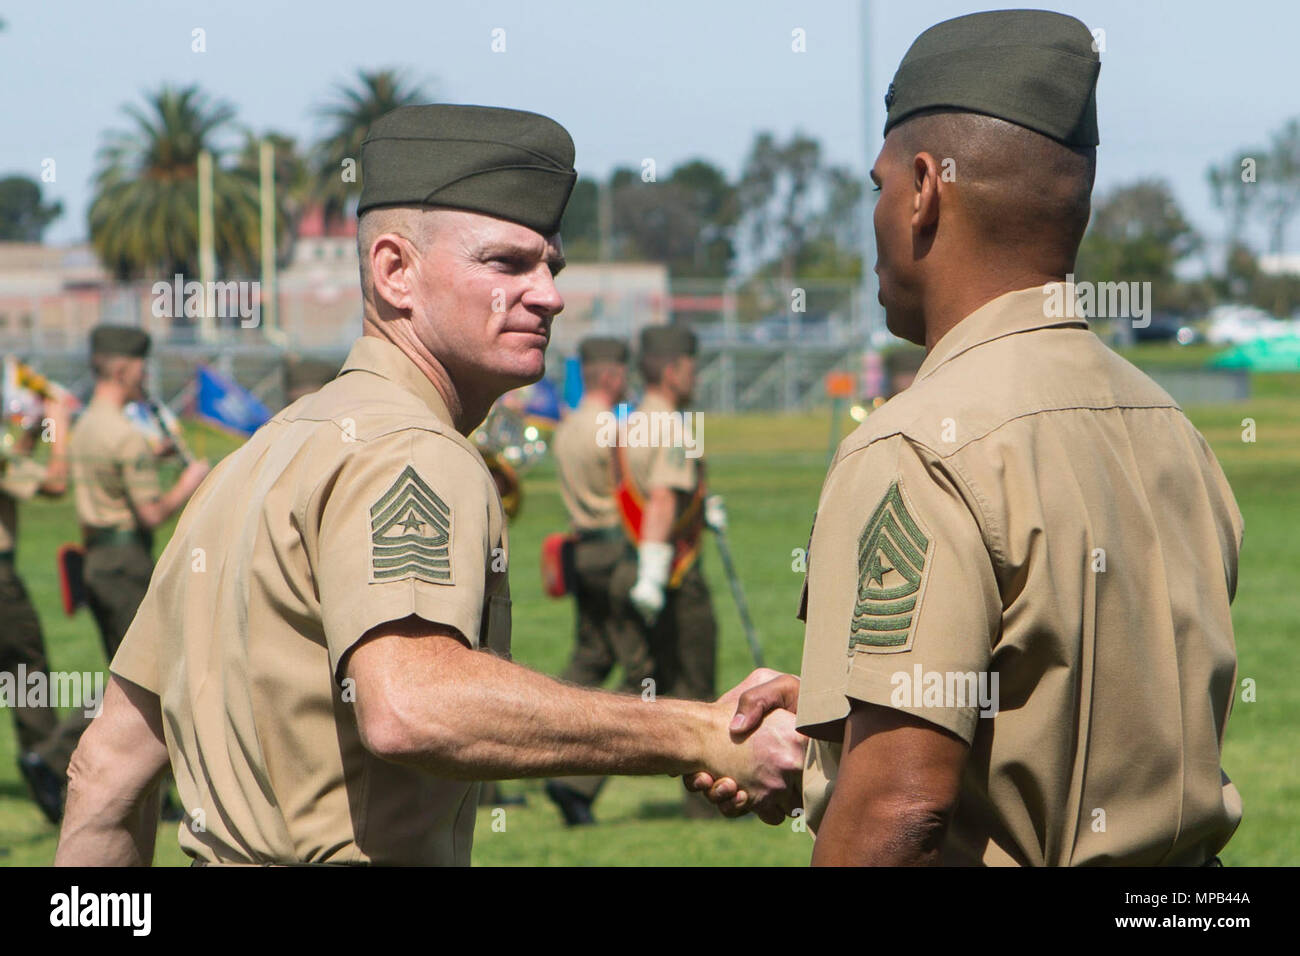 U.S. Marine Sgts. Maj.  Troy E. Black (left) and Lonnie N. Travis shake hands after the 1st Marine Logistics Group Relief and Appointment Ceremony aboard Camp Pendleton, Calif., April 7, 2017. Black relinquished his post as the sergeant major of 1st MLG to Travis during the ceremony at the 11 Area Parade Field. The ceremony included marching of the colors, passing of the sword of office, presenting Black his award and closing remarks from the oncoming and outgoing personnel. Stock Photo